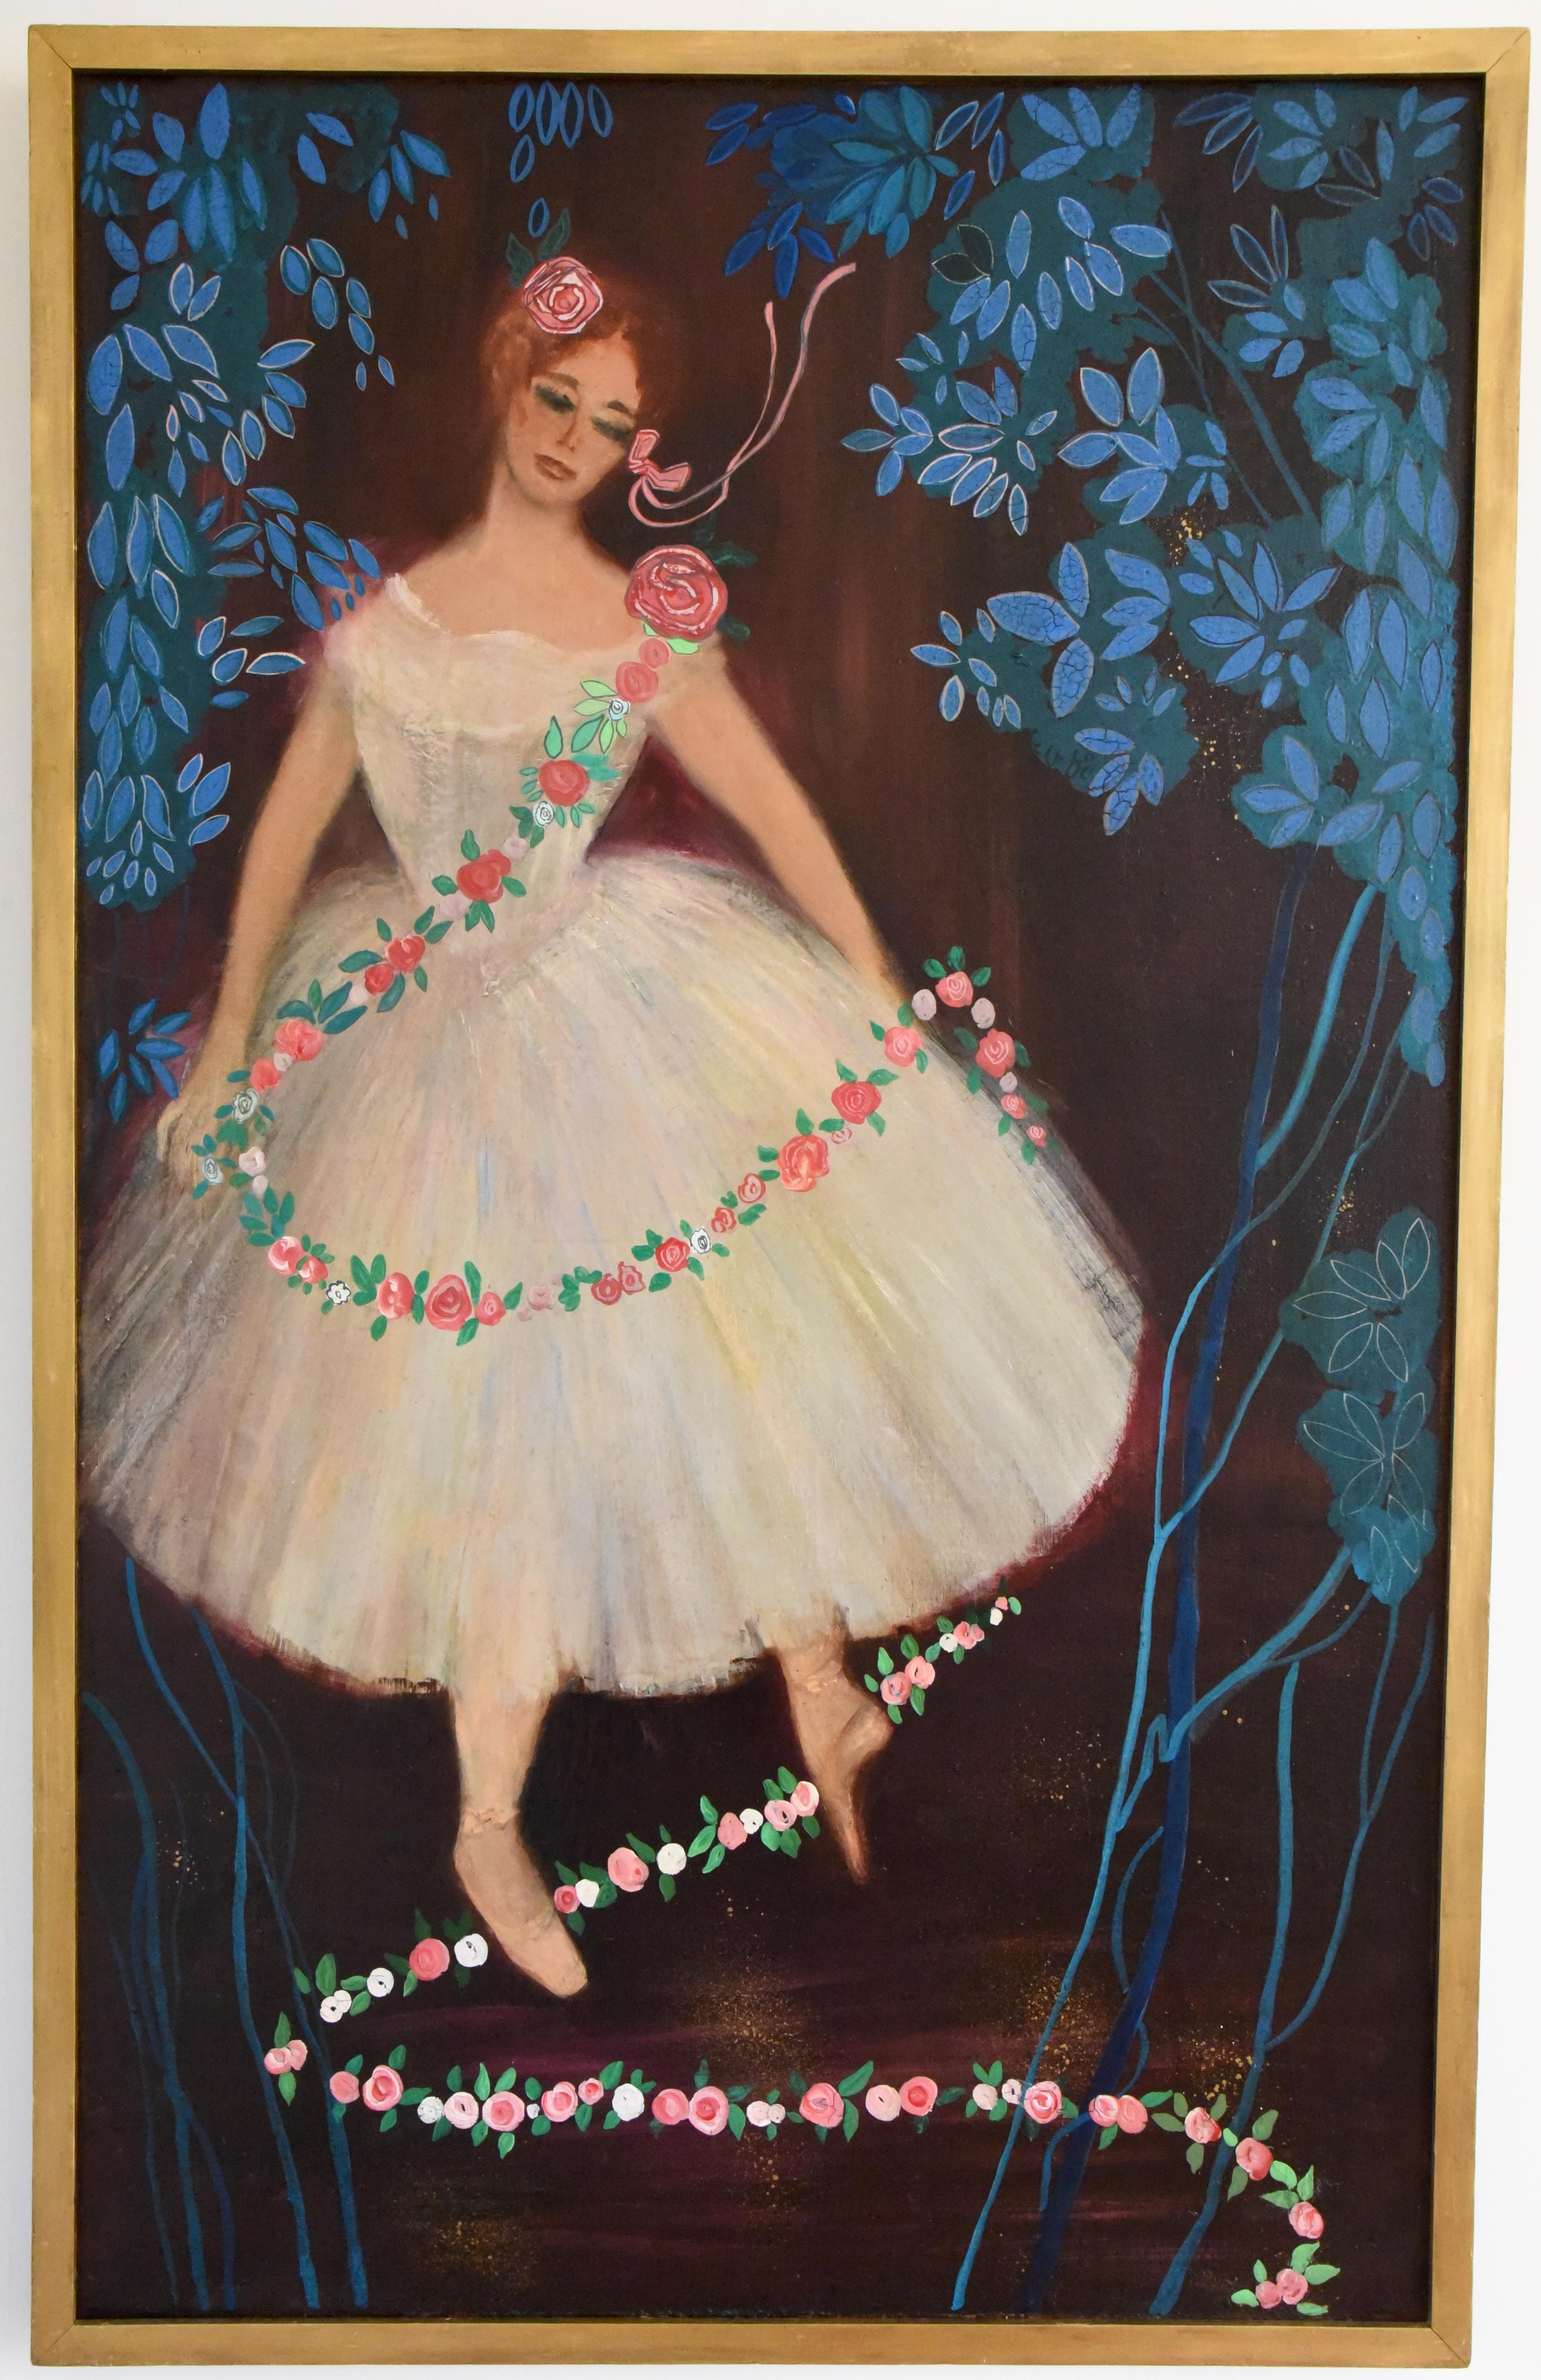 Large colorful midcentury oil painting of the ballerina Claude Bessy, France, 1956.
She is wearing a white tutu and garland of roses. The stage is decorated with turquoise flowers and leaves.
circa 1956-1960. Original wooden frame. 

Mlle. Bessy